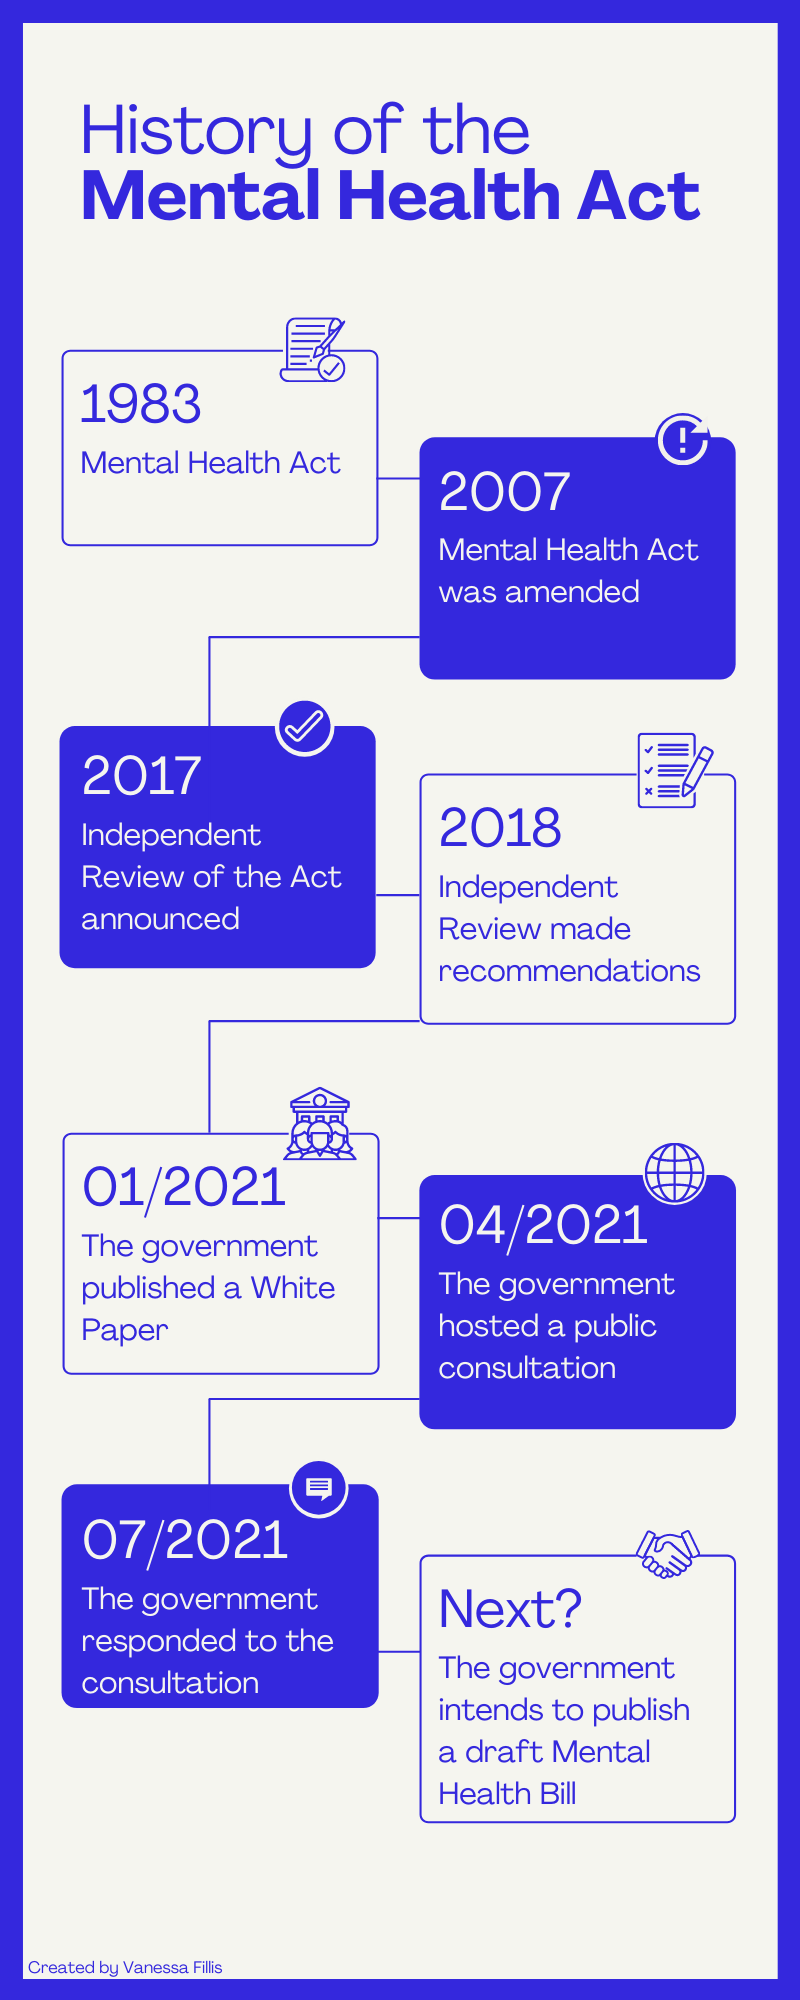 The history of the Mental Health Act